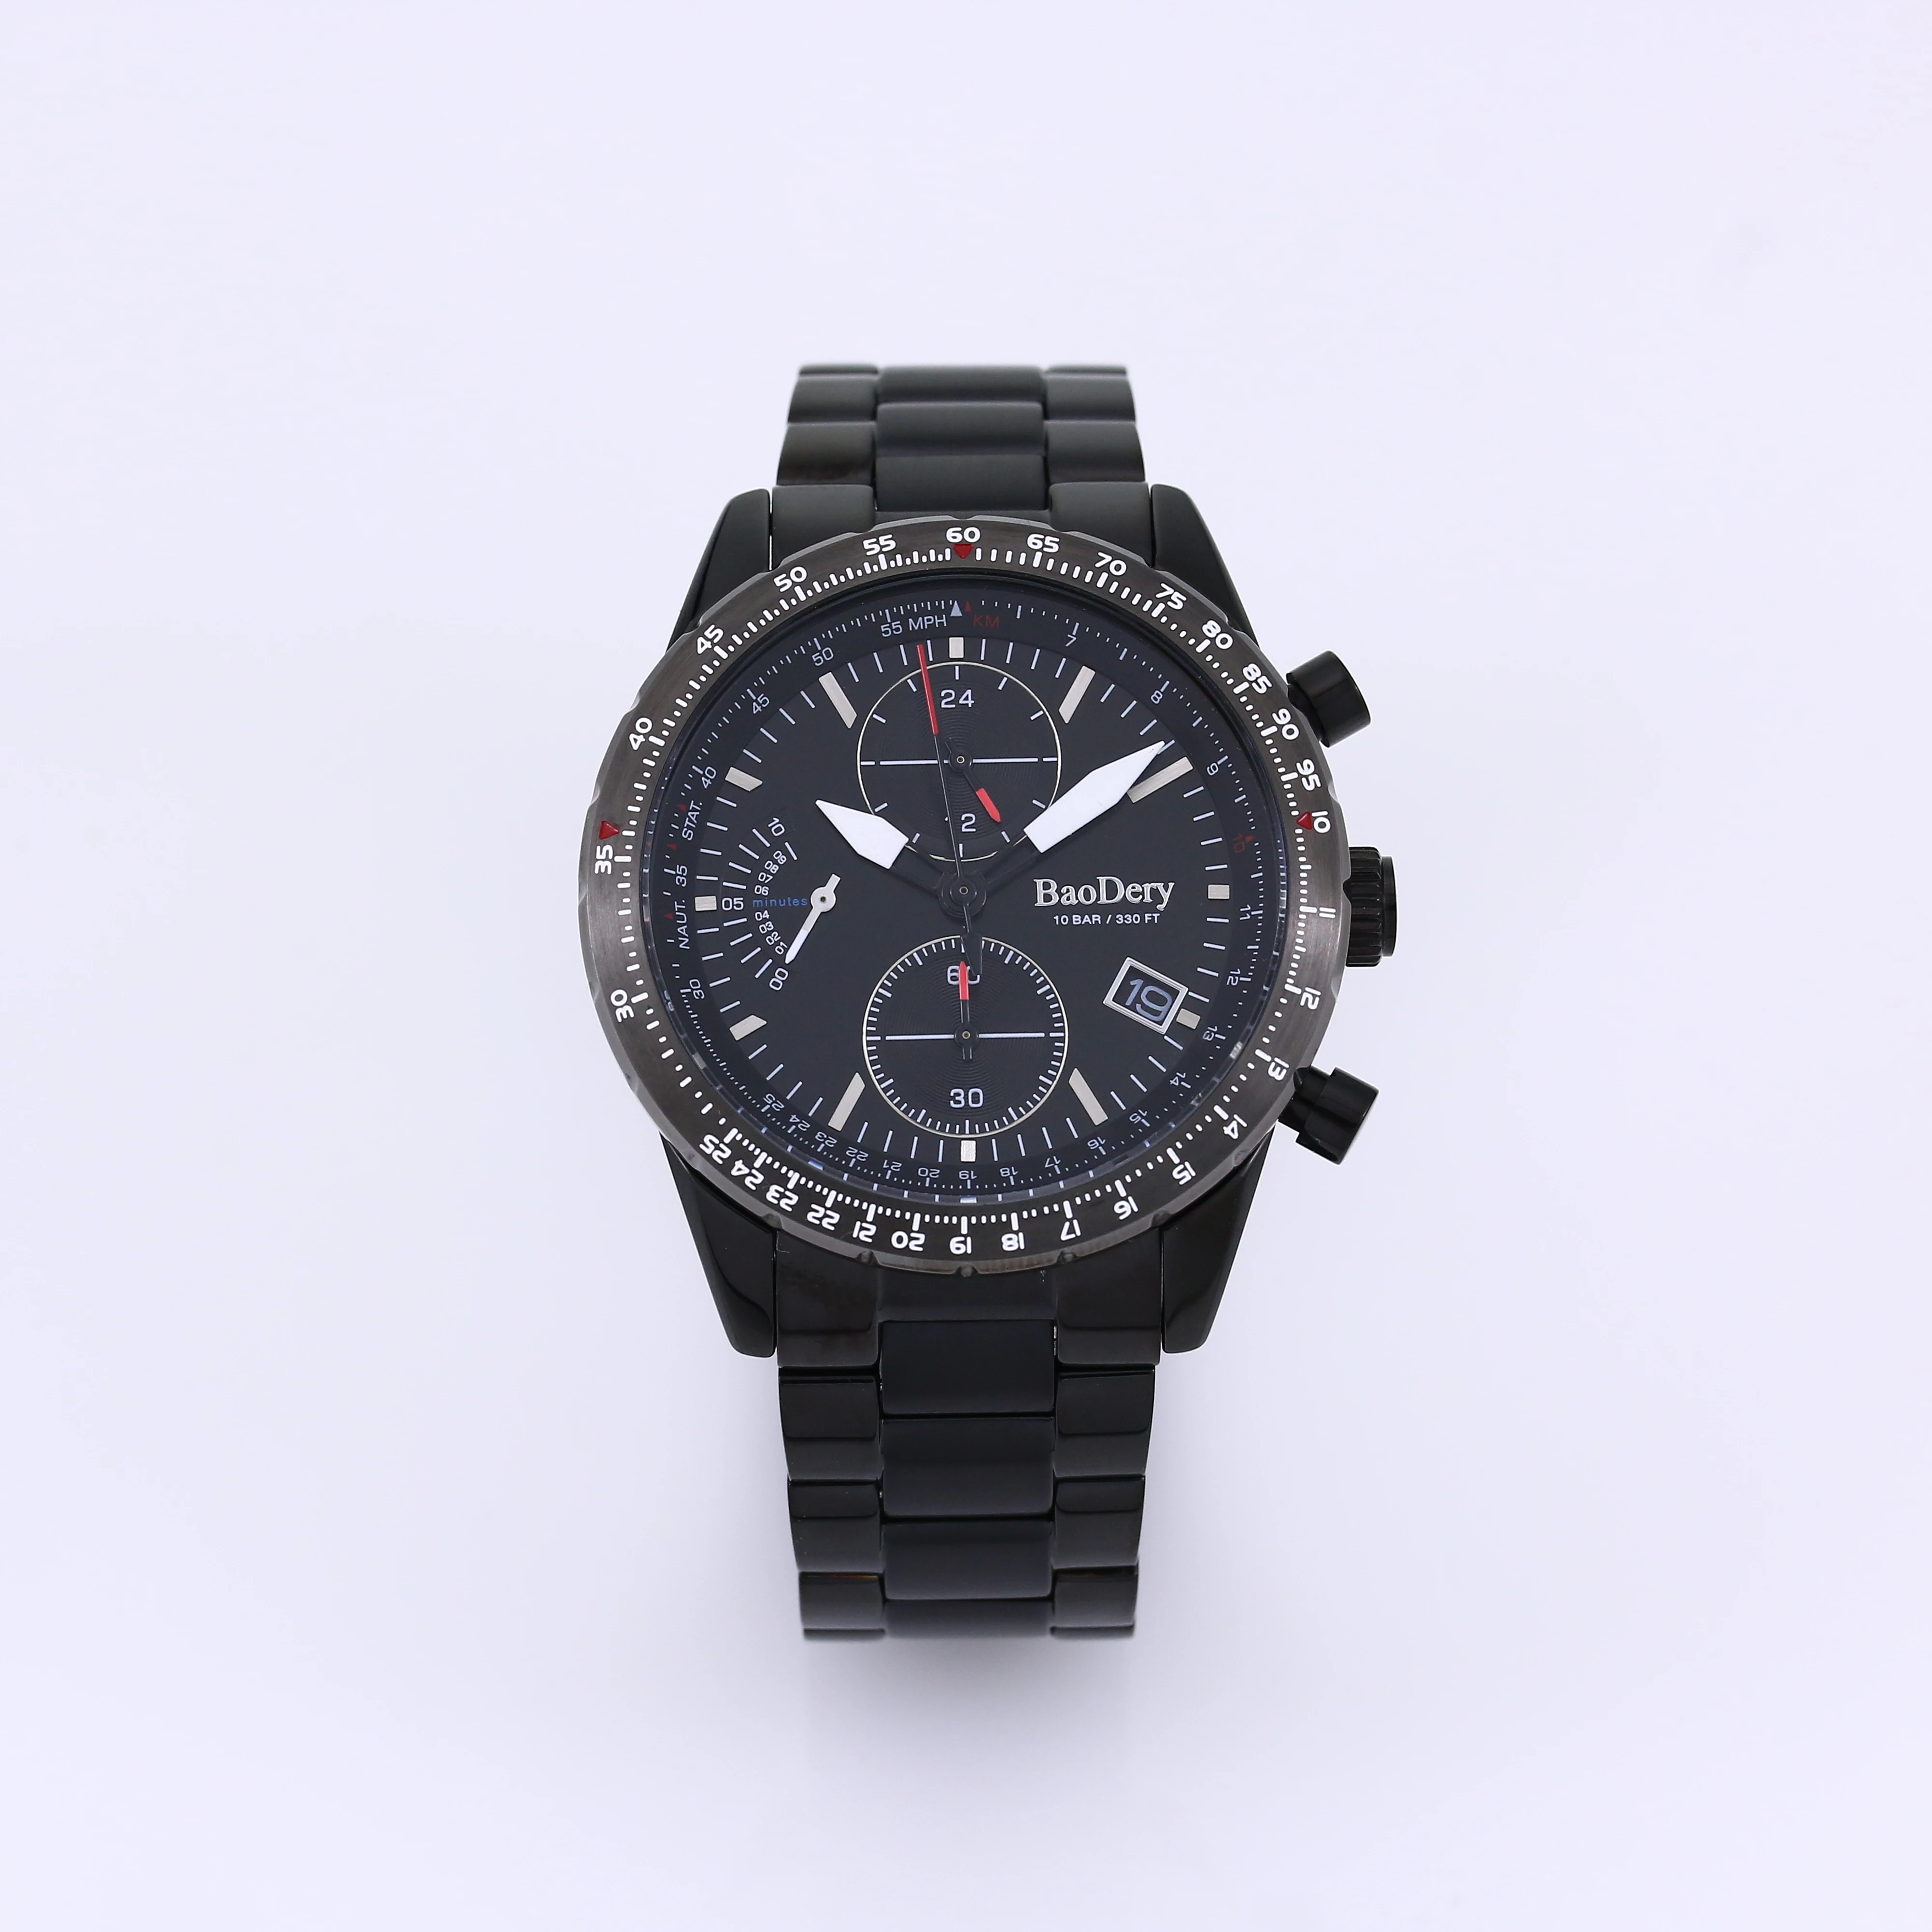 Optimize Your Time in Sporty-Chic Style - The 46mm Black Chronograph Watch with Day, Date and 24H Indicators! папка светоотражающая art hype your time 35х27х7 см